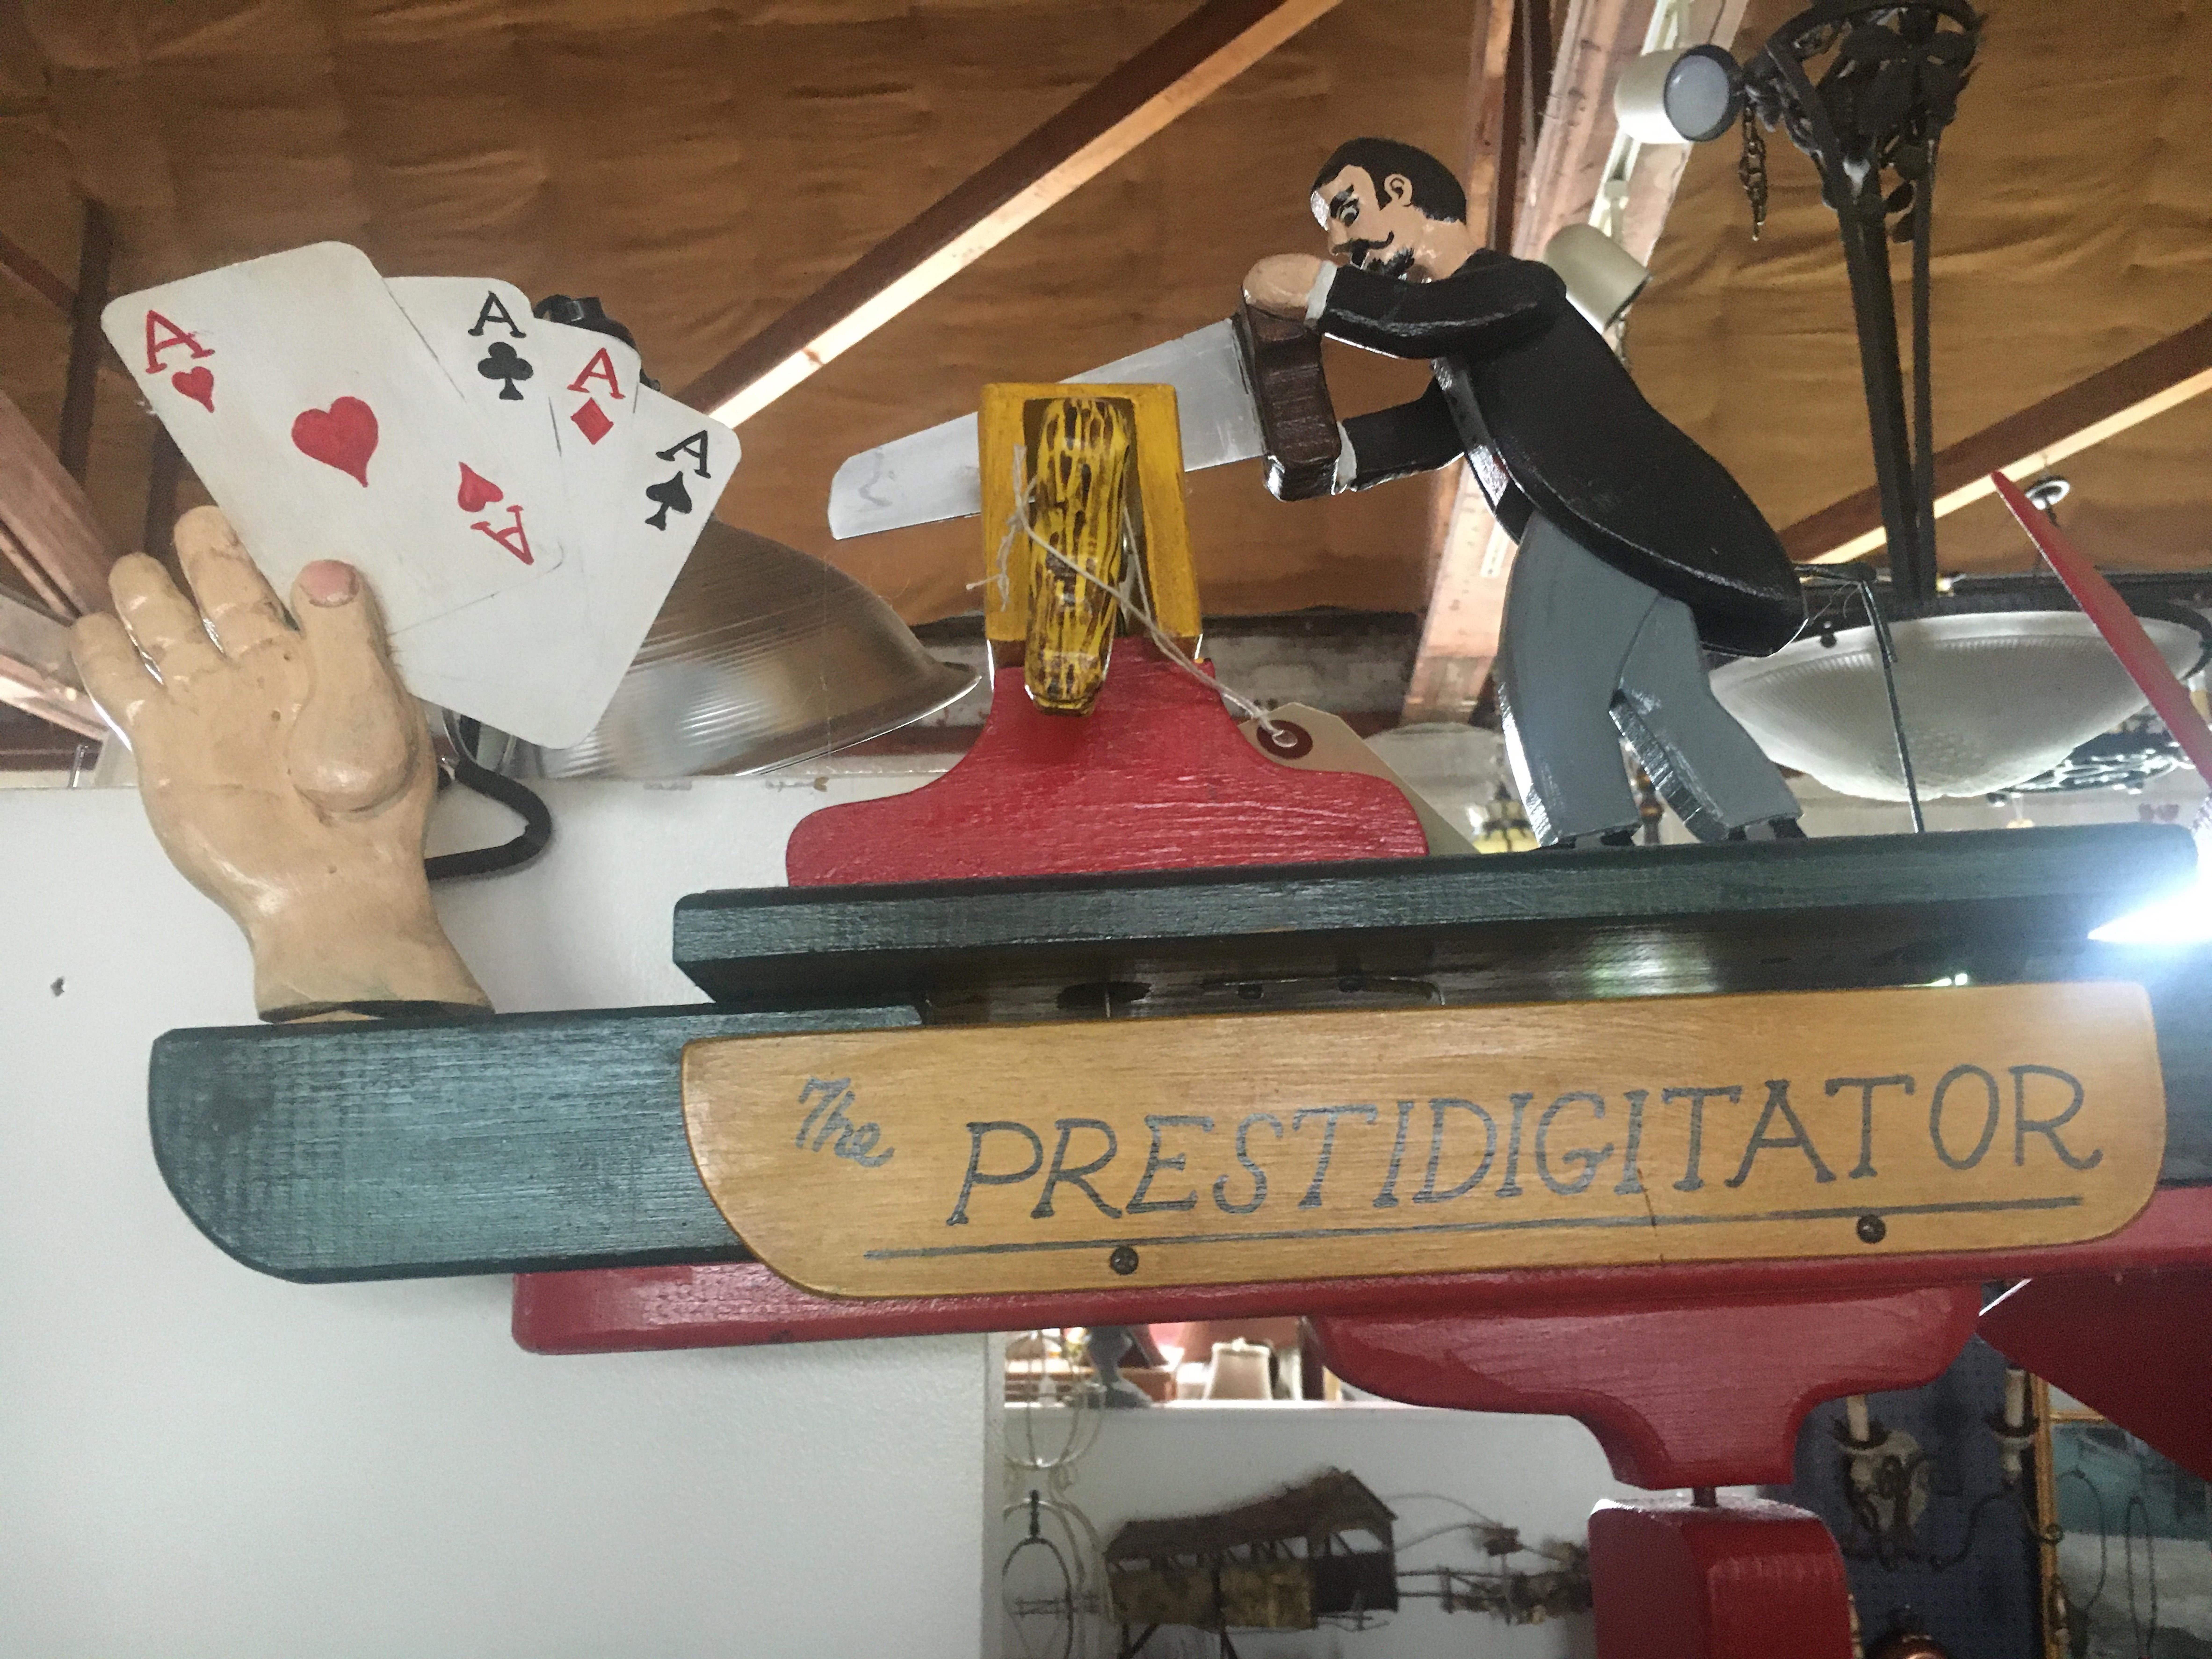 Len Norman, American 20th century) the prestidigitator. Assembled and painted whirligig depicting a magician and body sawing act
Measures: 23